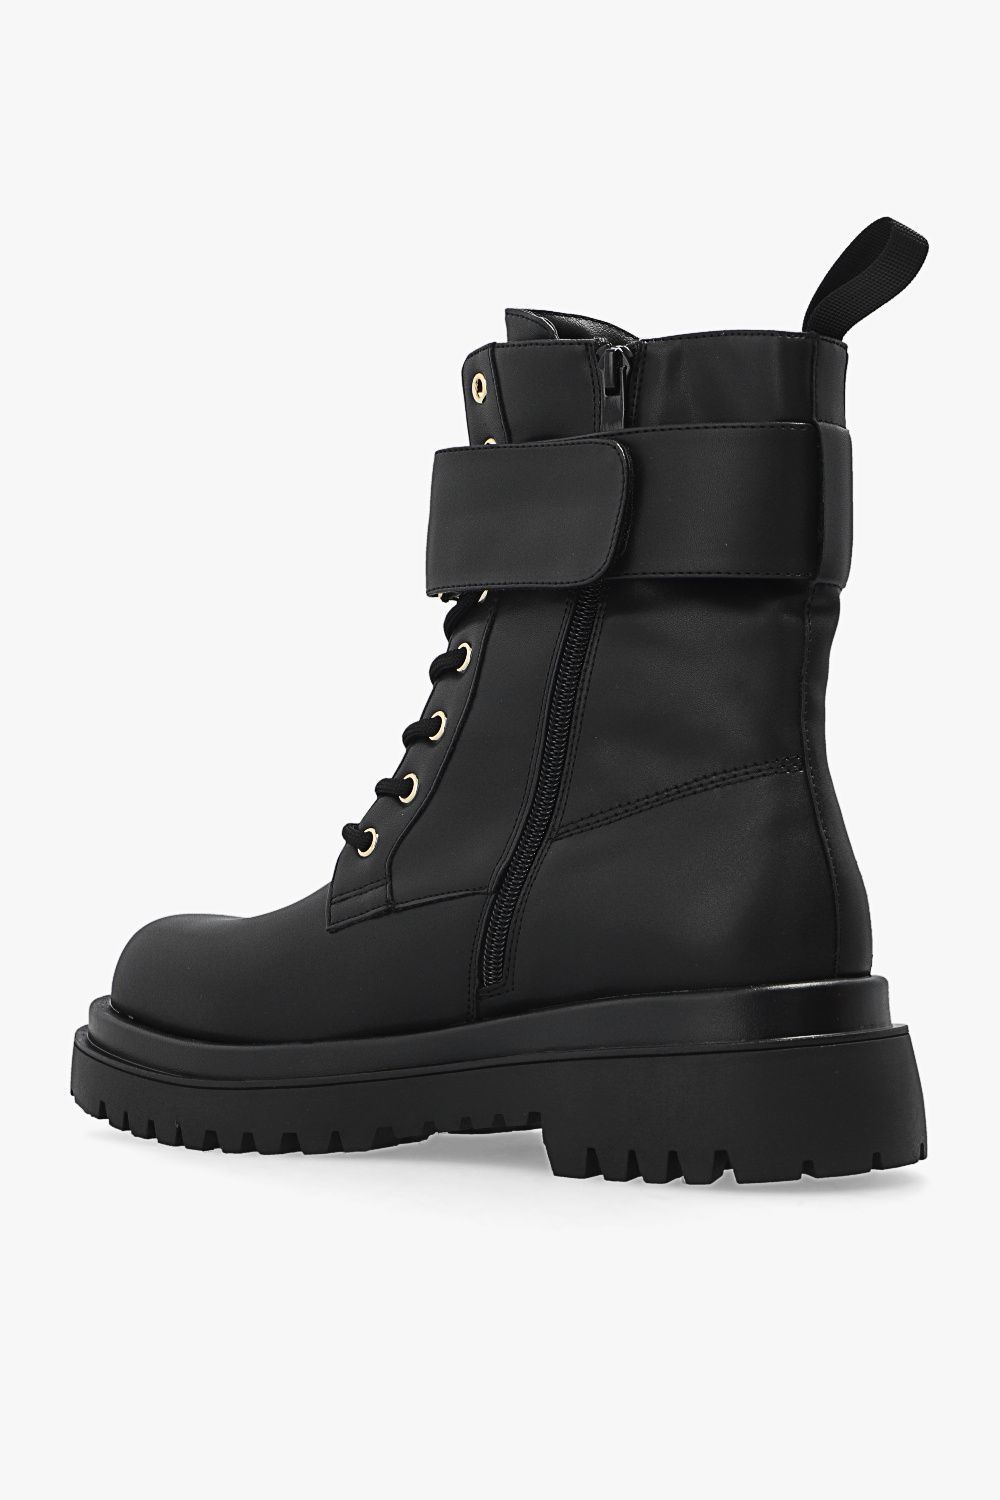 Stay on the front side of fashion with these cute boots Combat boots